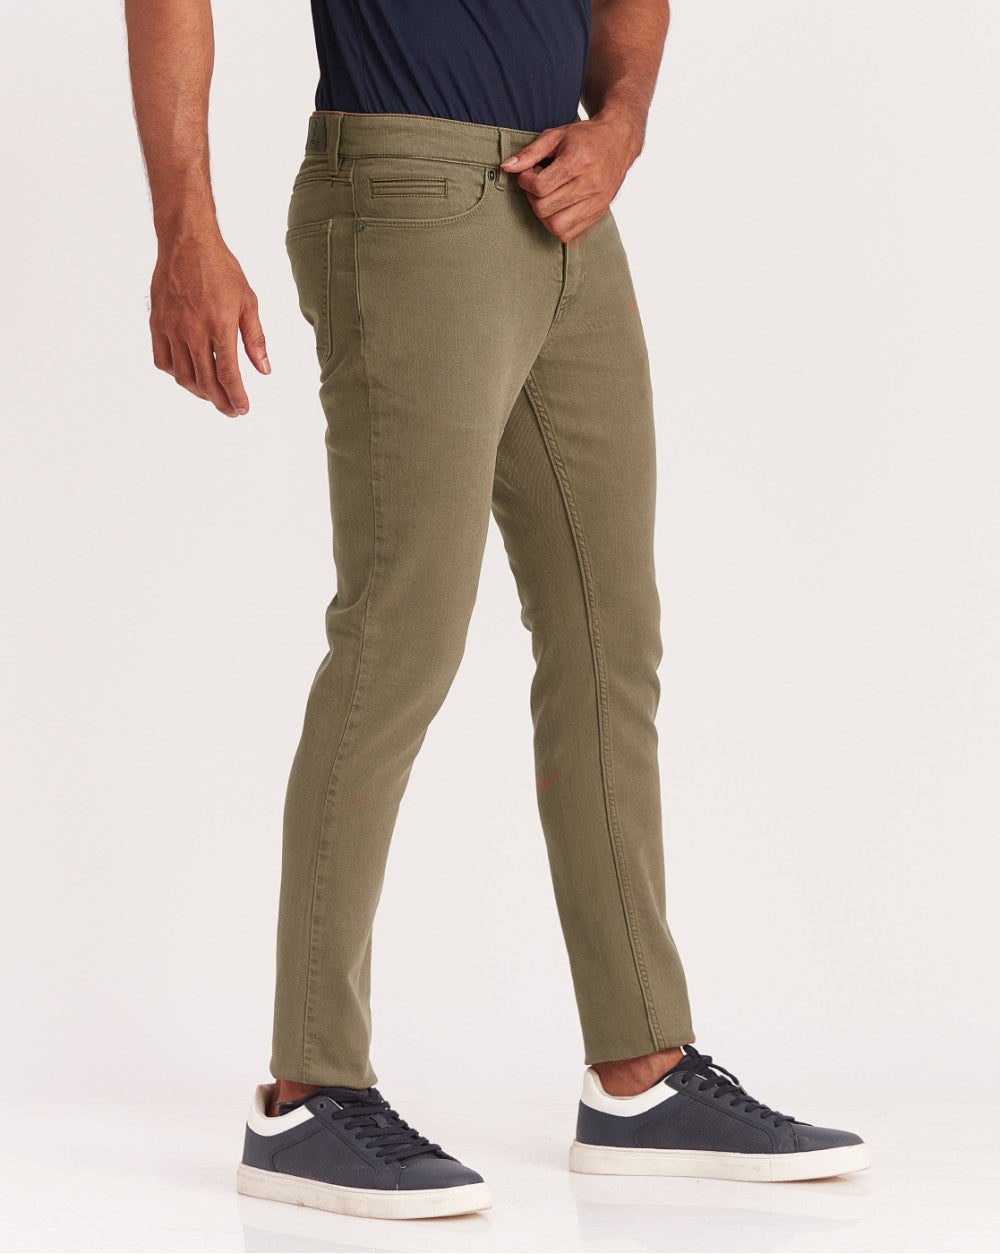 Skinny Fit Six-Pocket Coloured Denims - Army Green